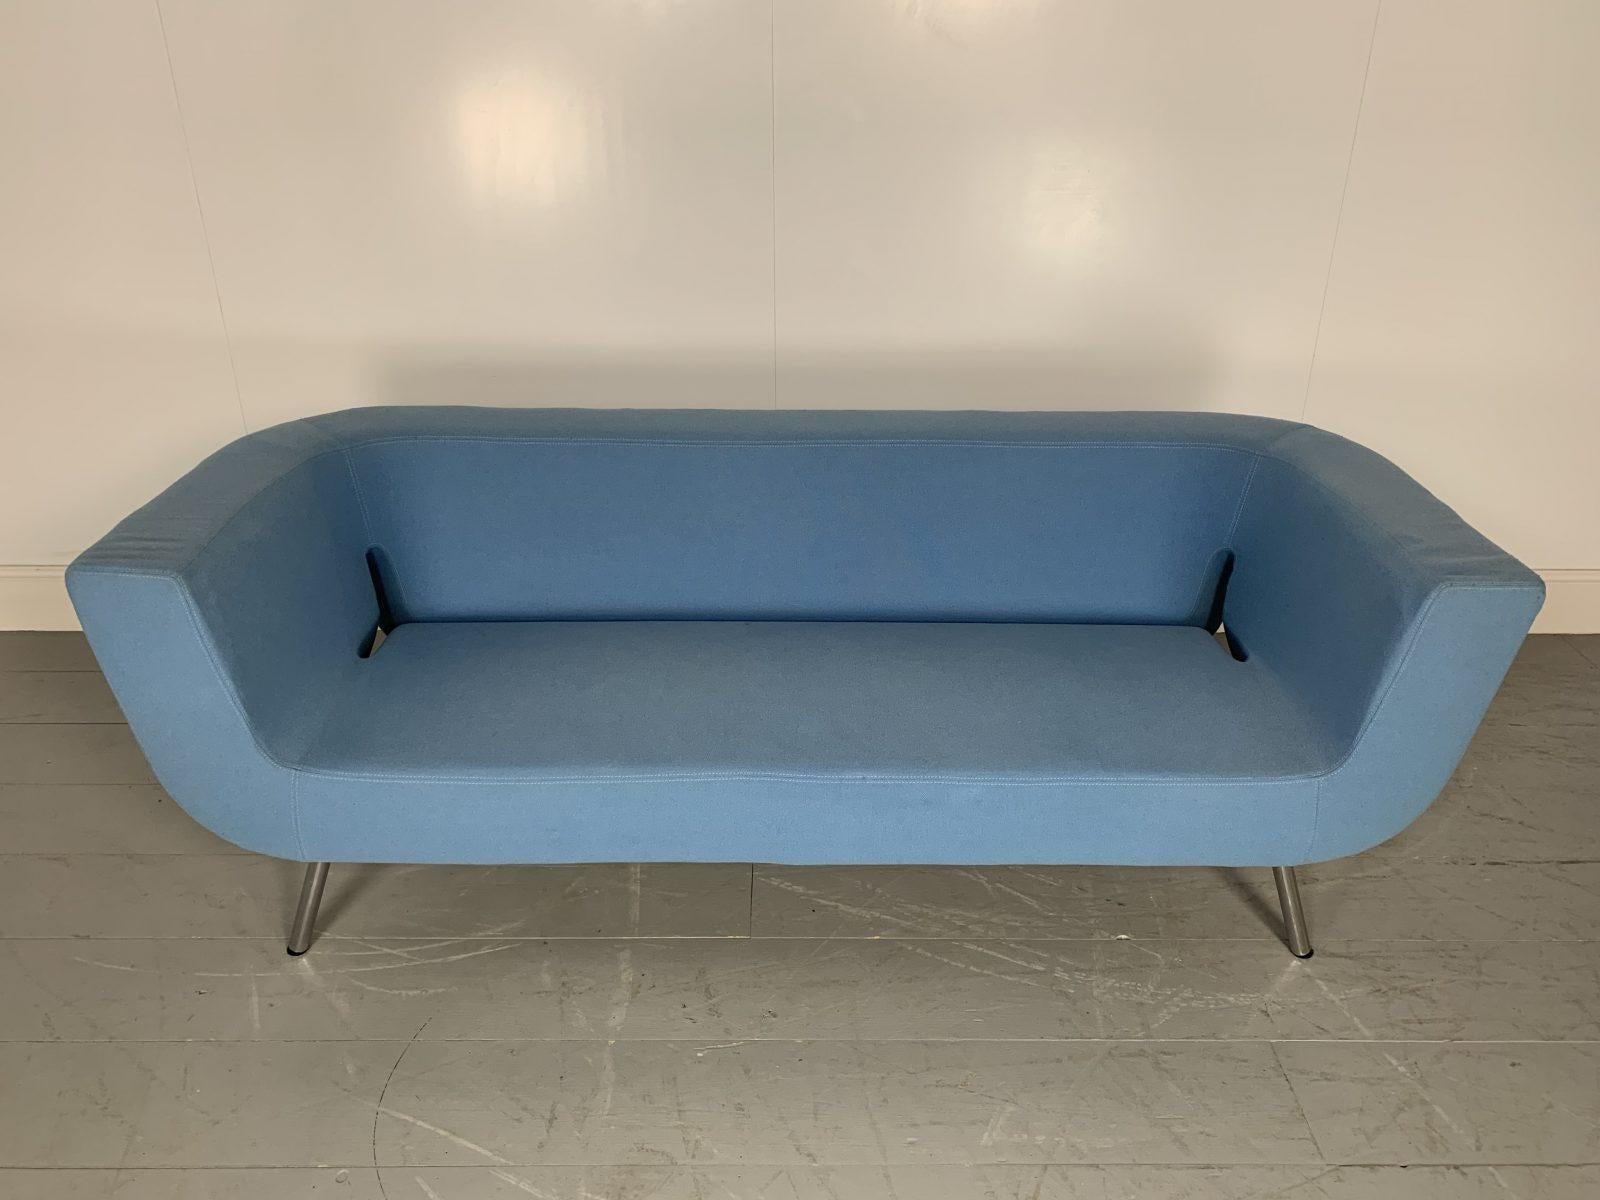 On offer on this occasion is a superb, immaculate Artifort “Bono” Large Sofa, dressed in a Peerless top-grade Natural Woven-Wool Fabric in Mid-Blue Kvadrat Woven-Wool fabric.

As you will no doubt be aware by your interest in this Diplomat